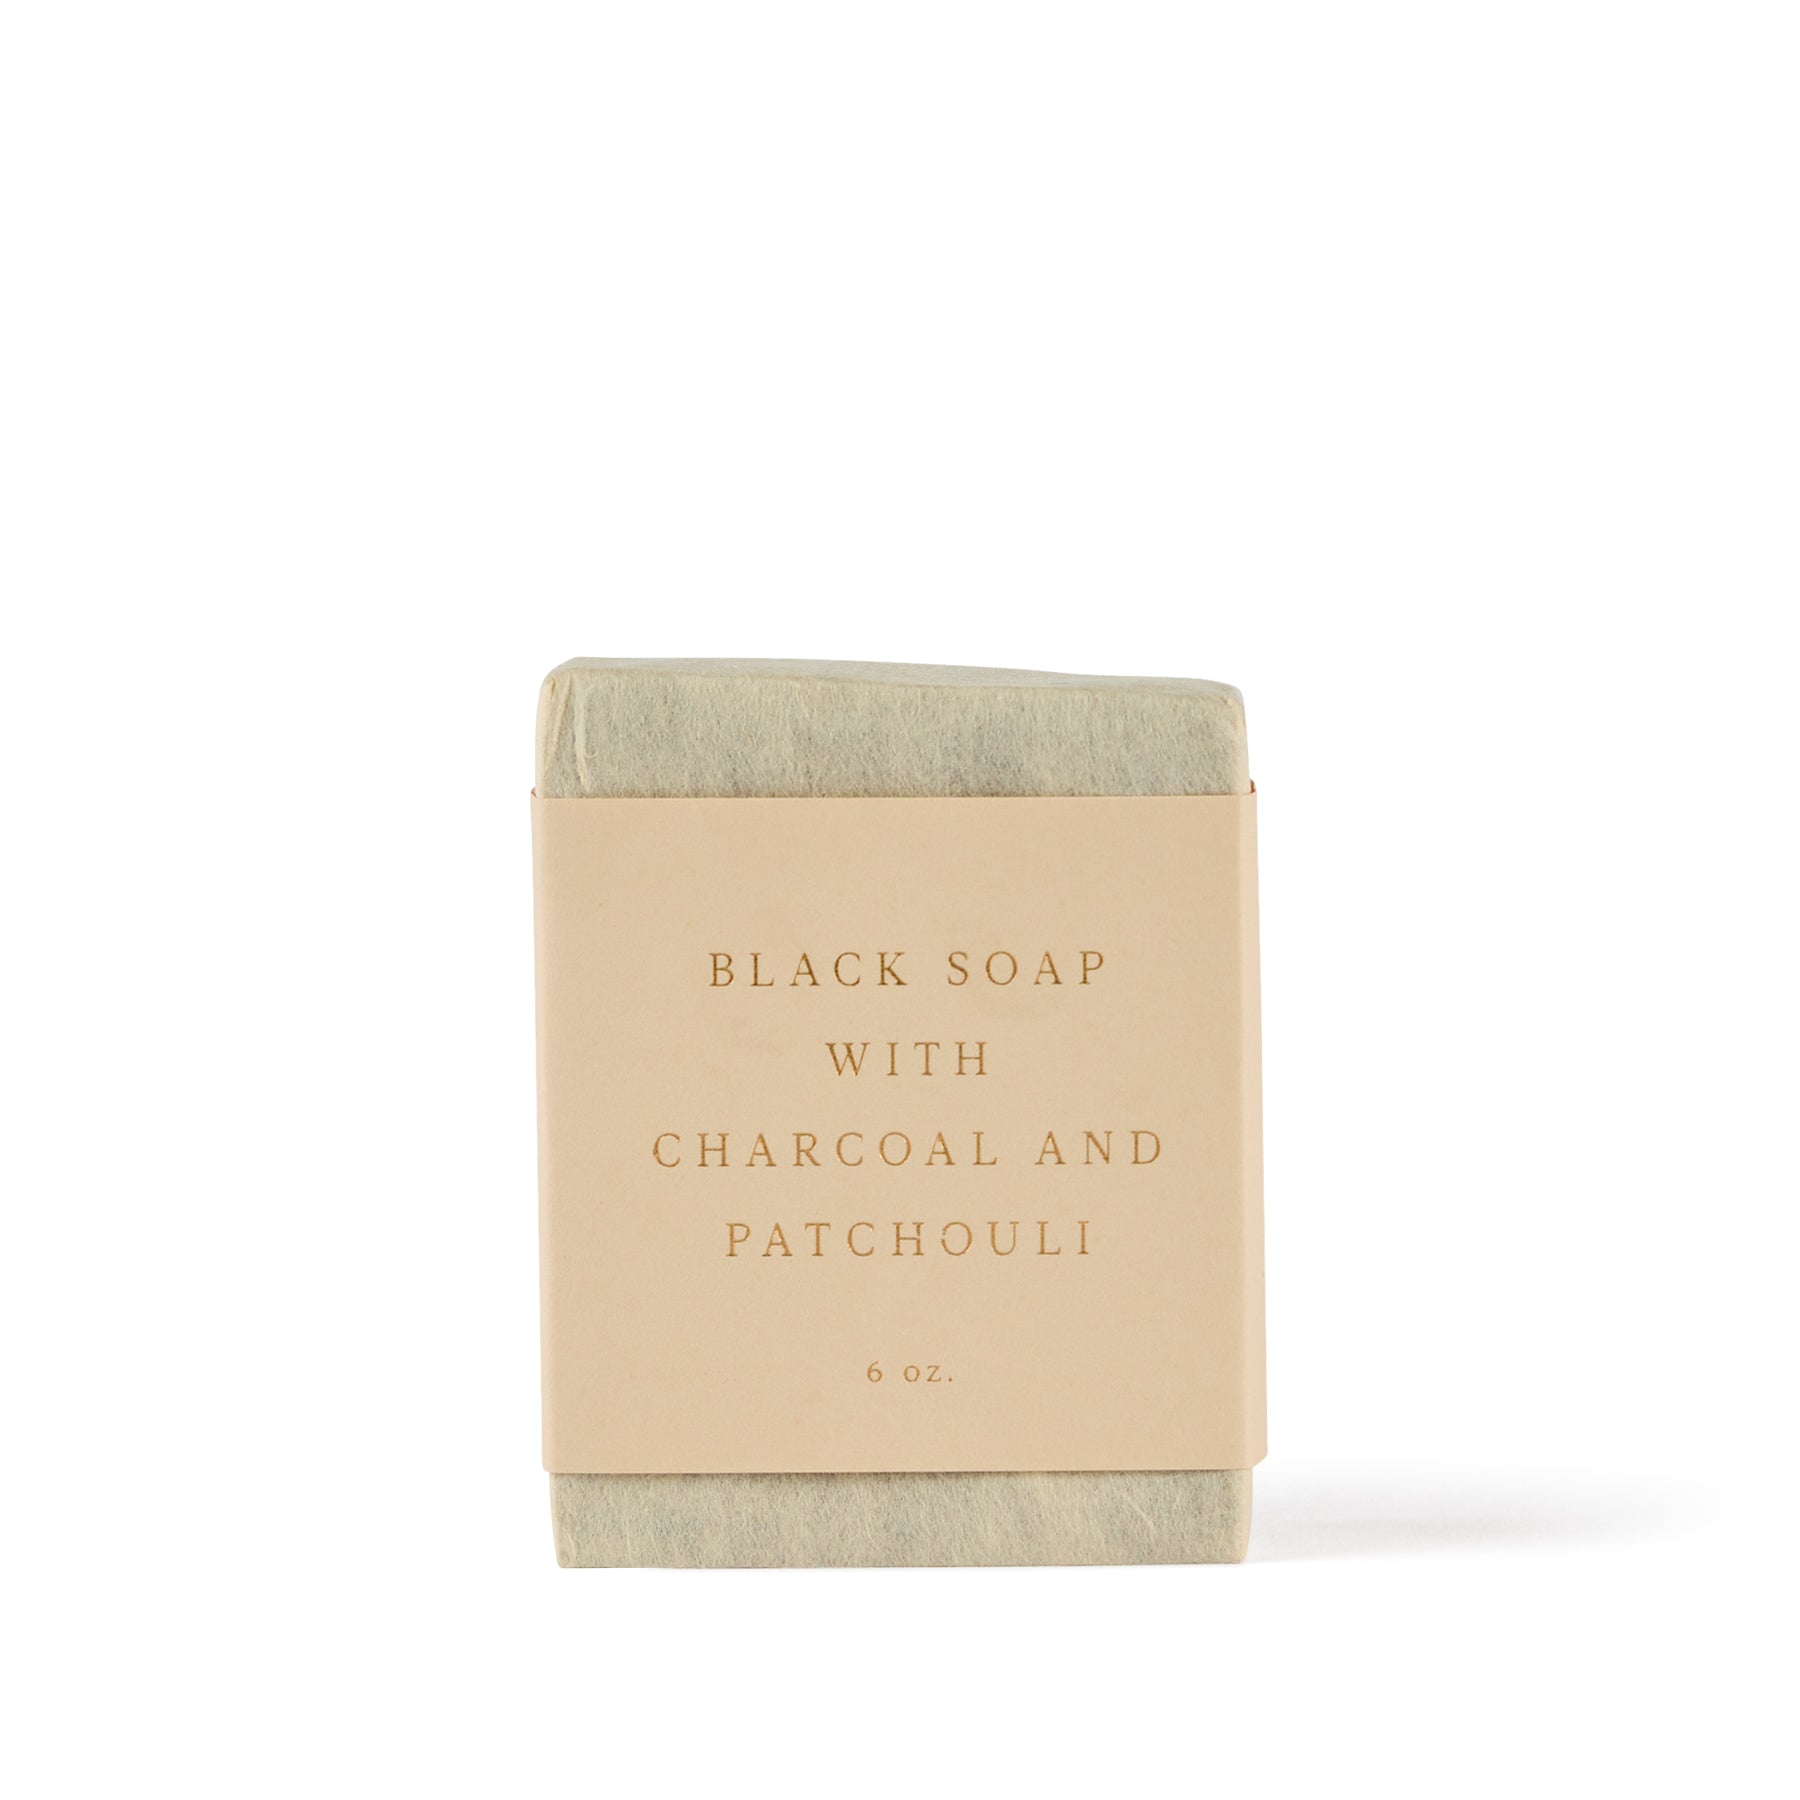 Black Soap with Charcoal and Patchouli Zoom Image 1